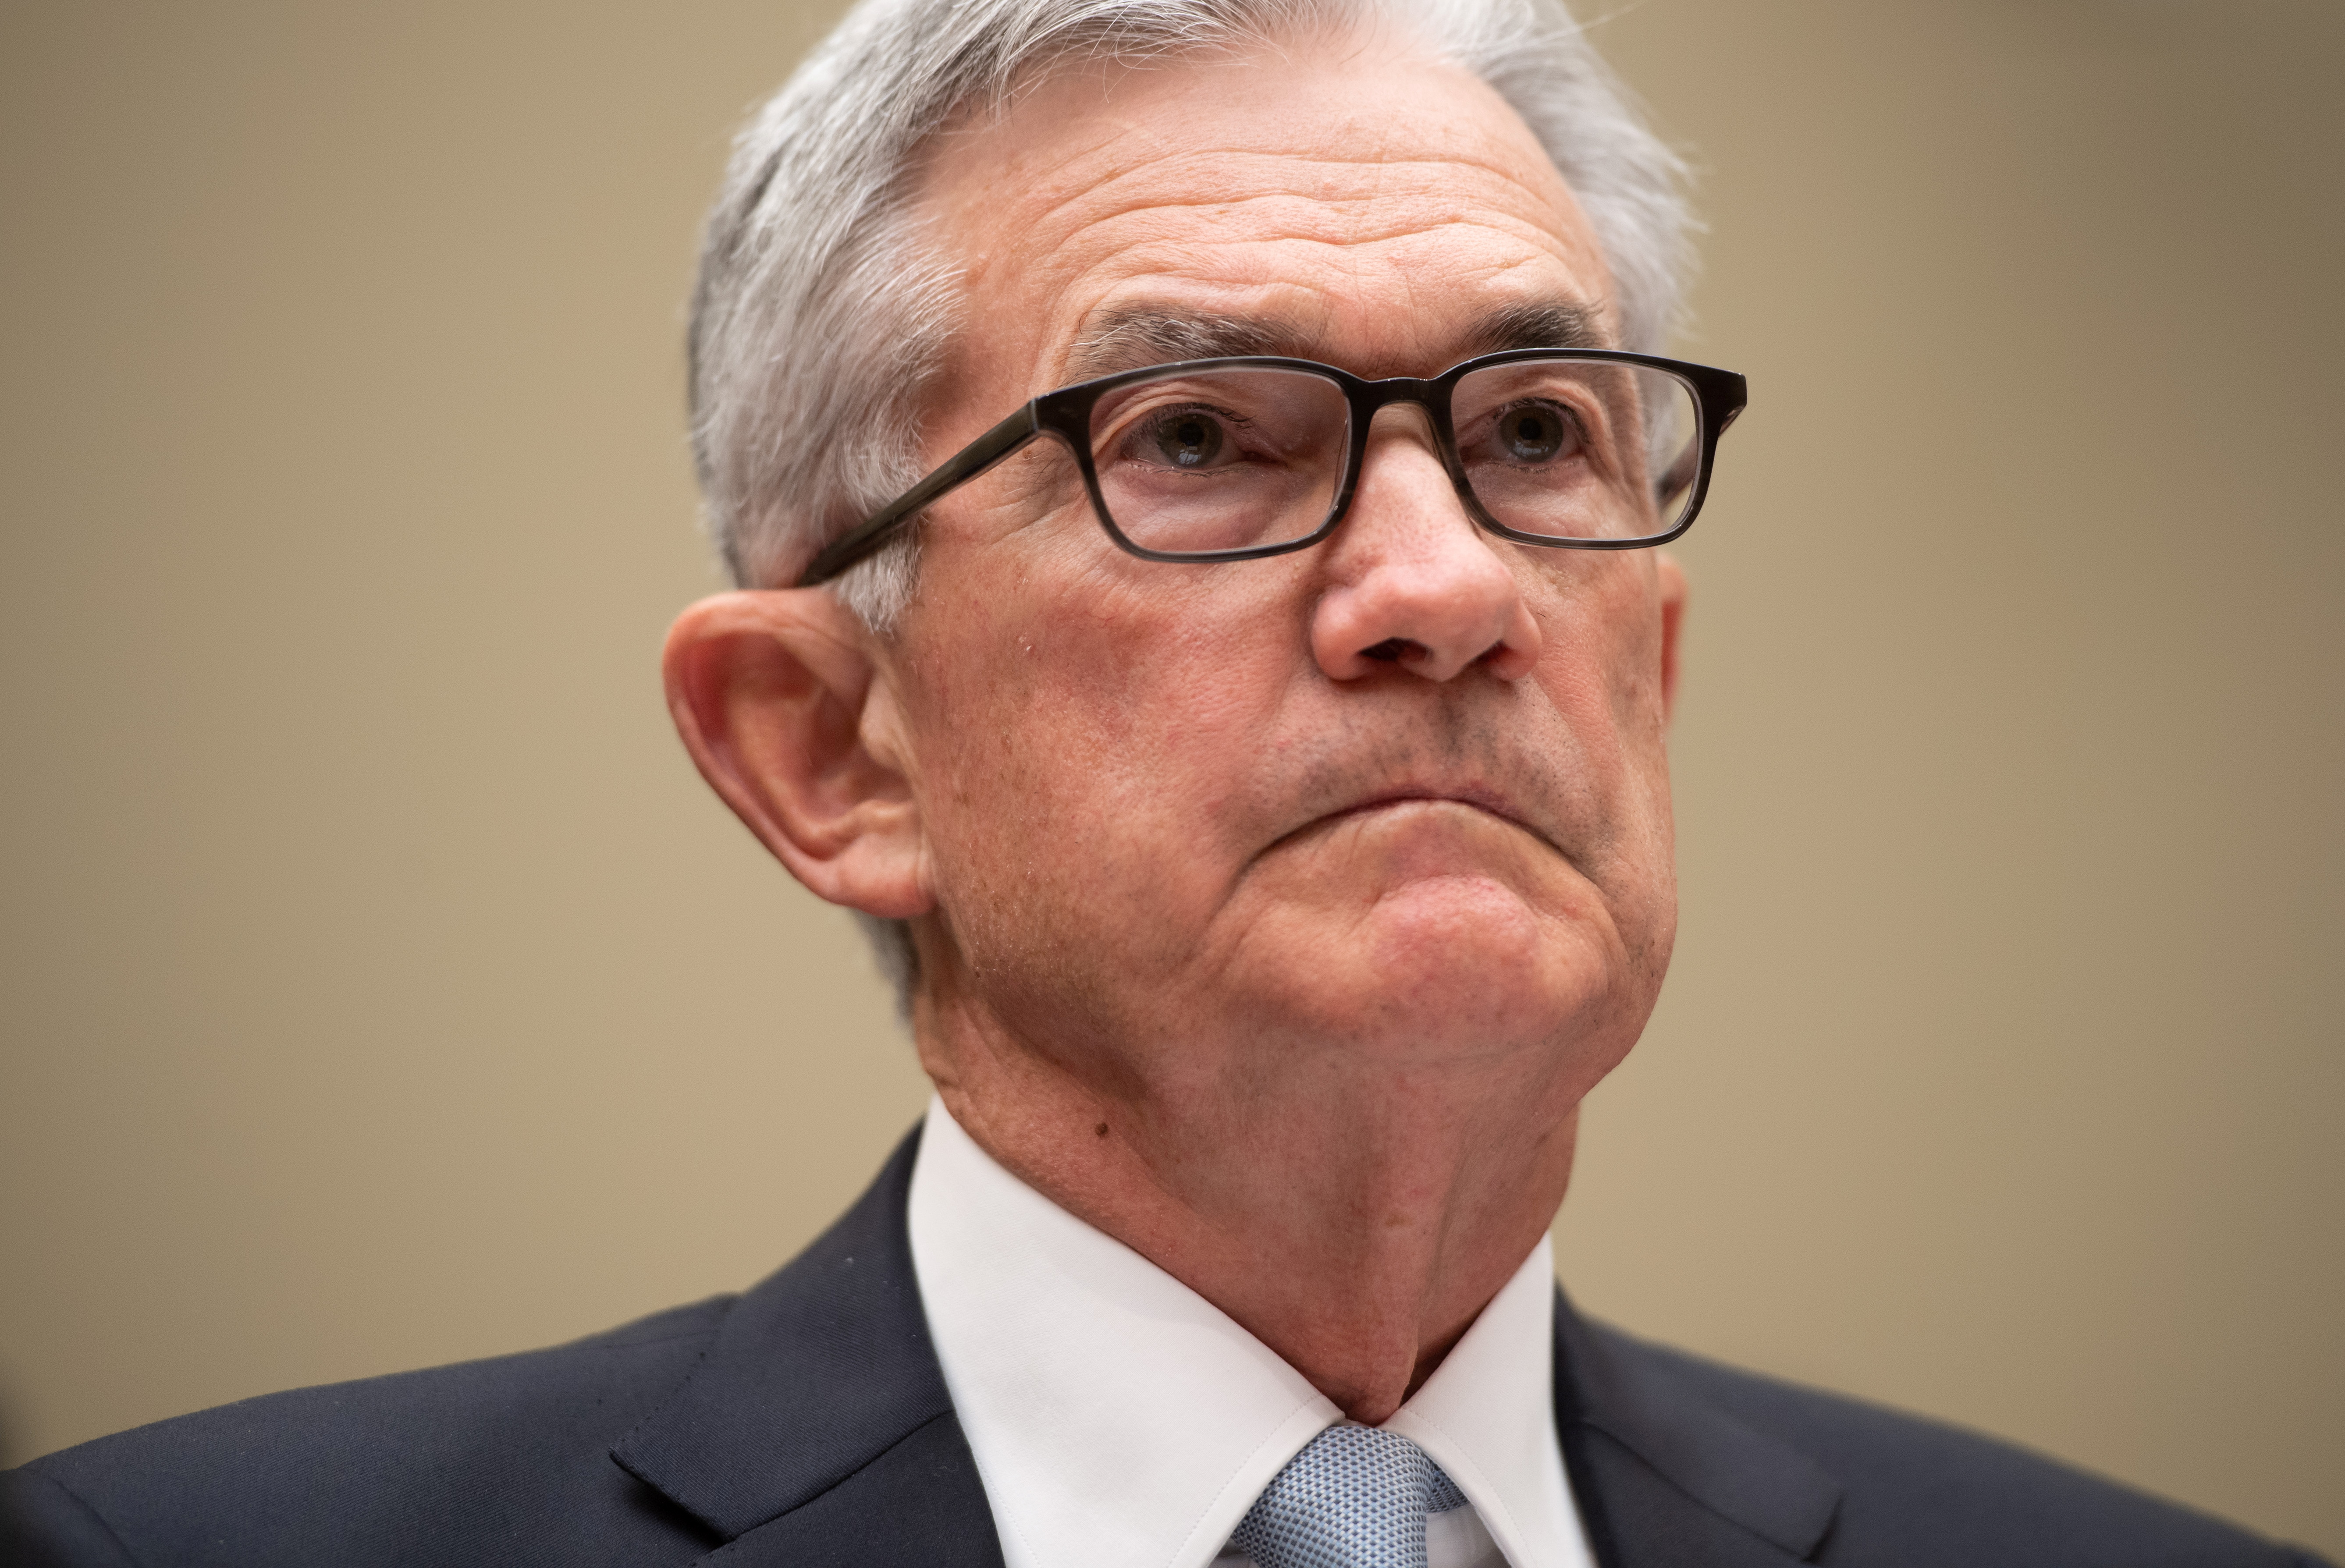 Federal Reserve Chair Powell testifies on Capitol Hill in Washington